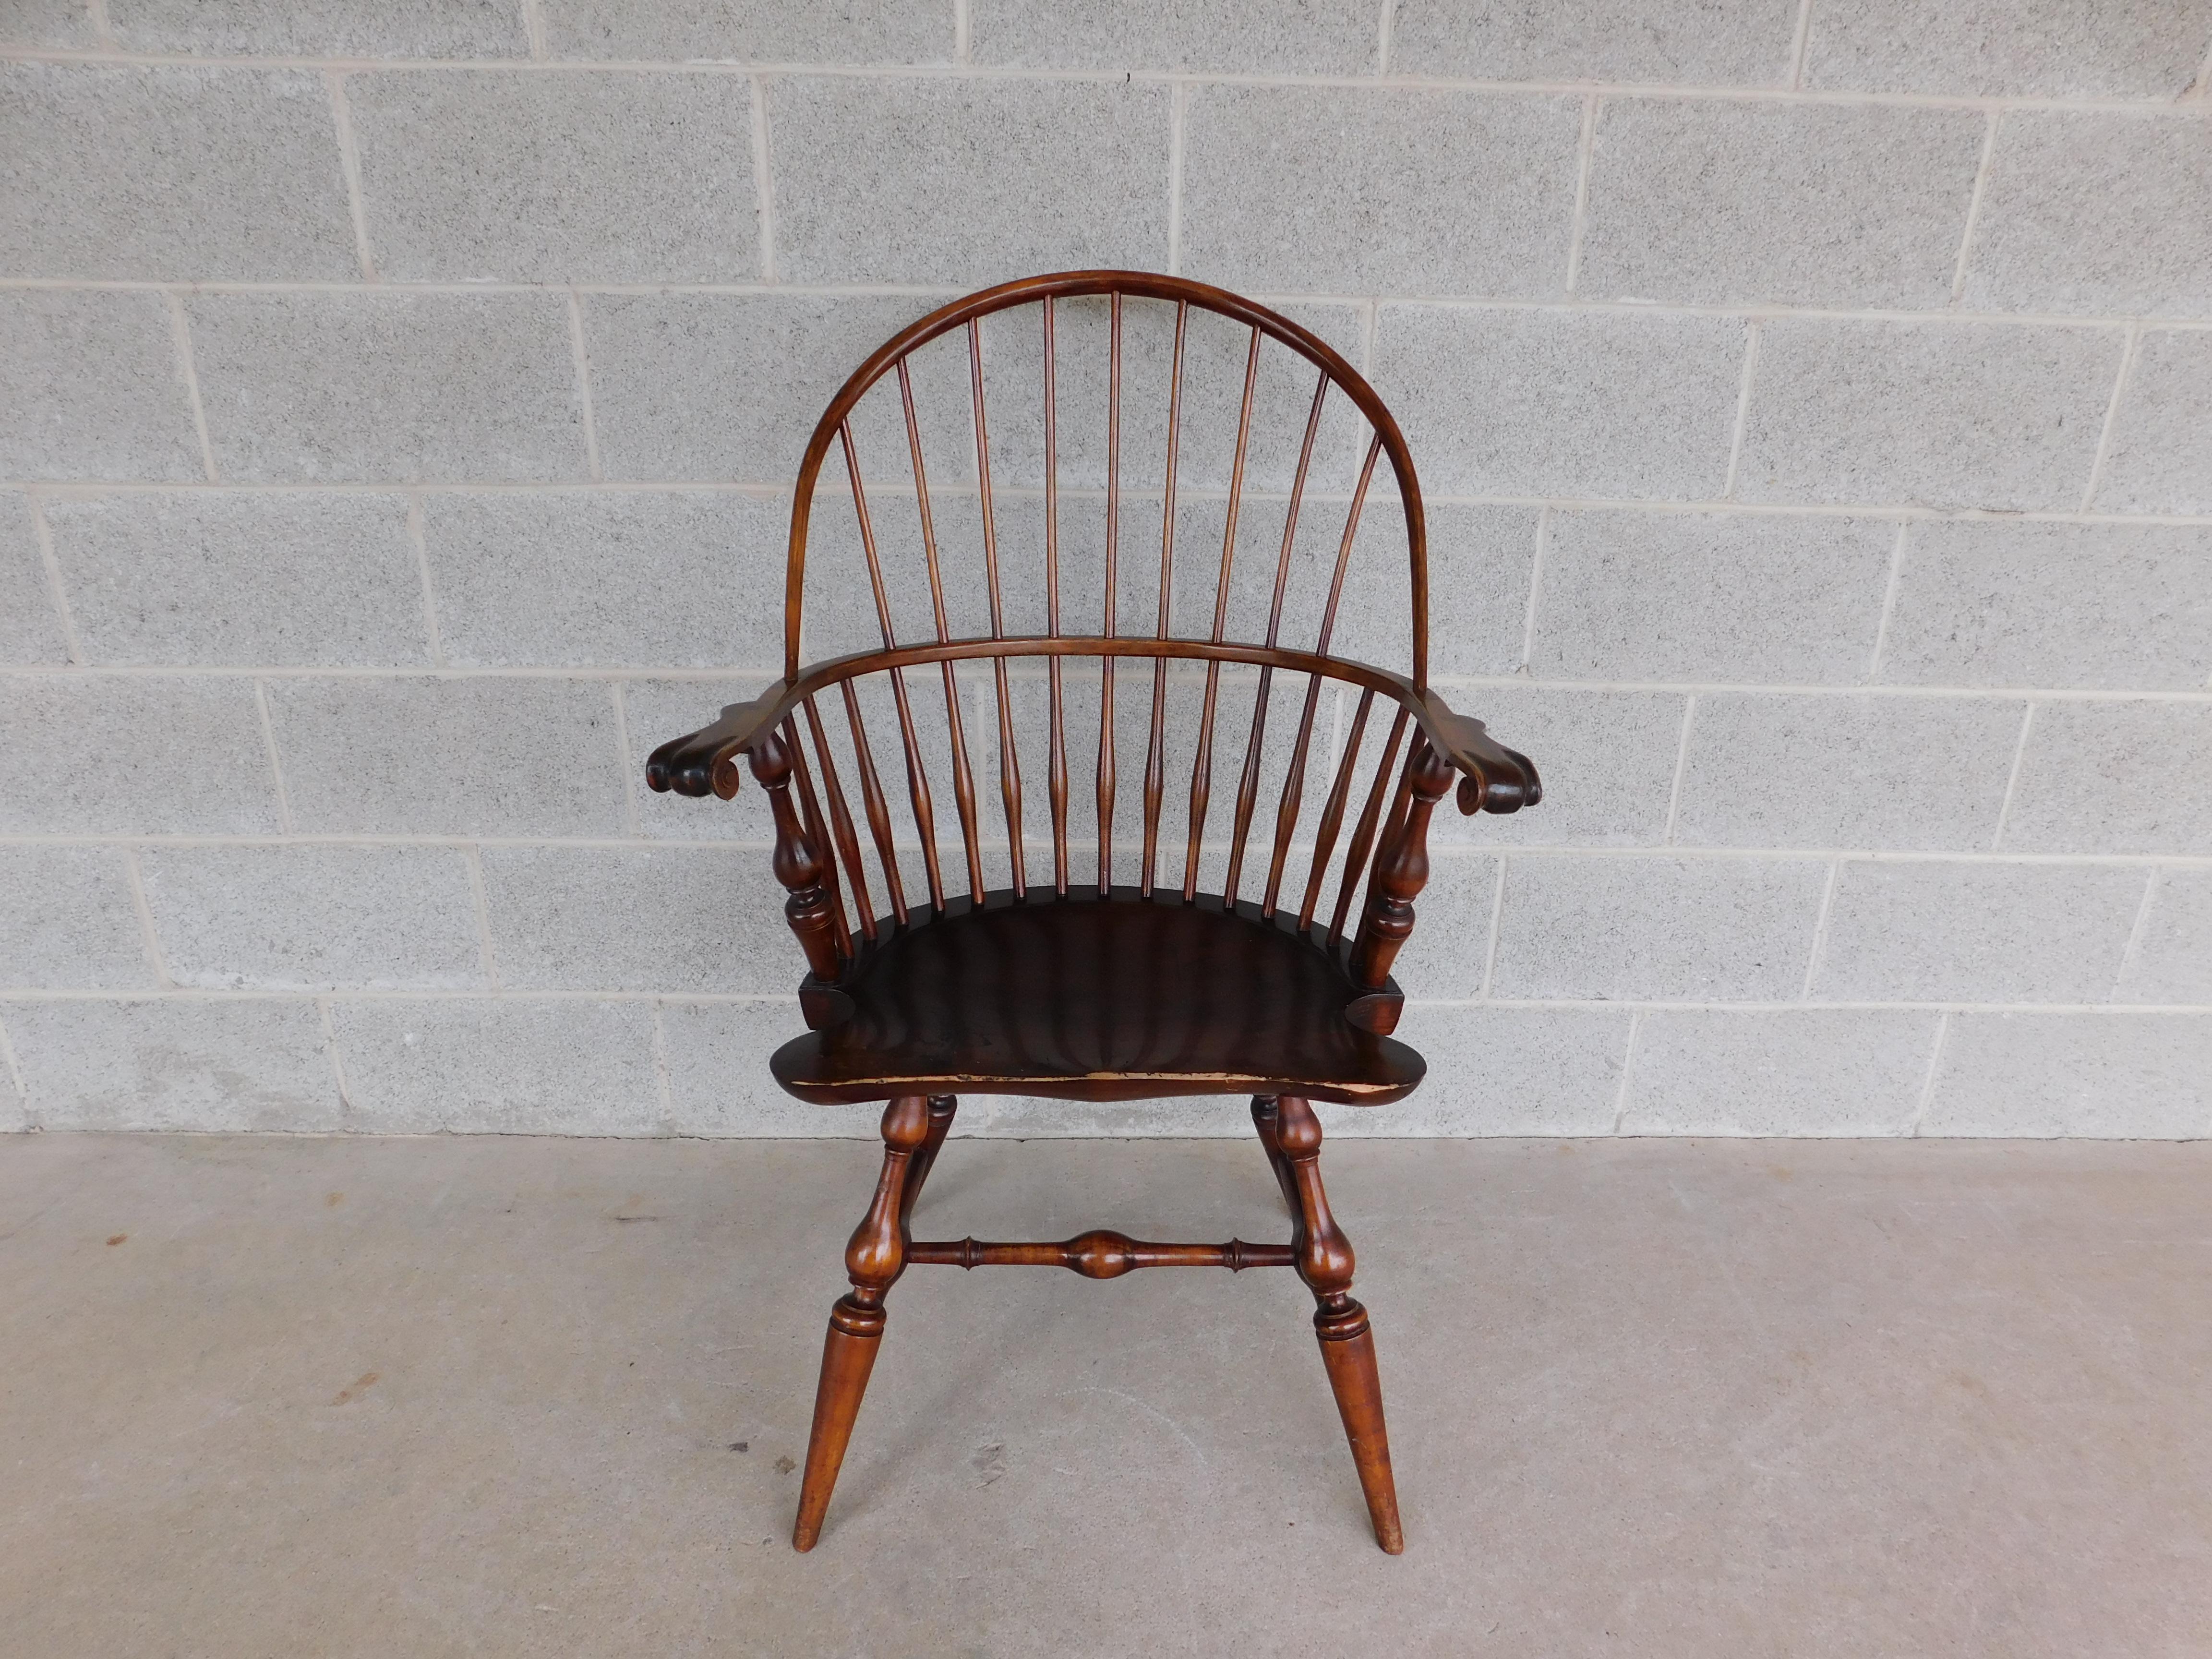 Wallace Nutting #408 Bow Back Windsor Arm Chair

Circa 1900 - 1925 Original Finish

Turned Legs, Various Hardwoods Used, and Pine. Sturdy Construction ( Hickory, Maple, and Pine

Back Height 41